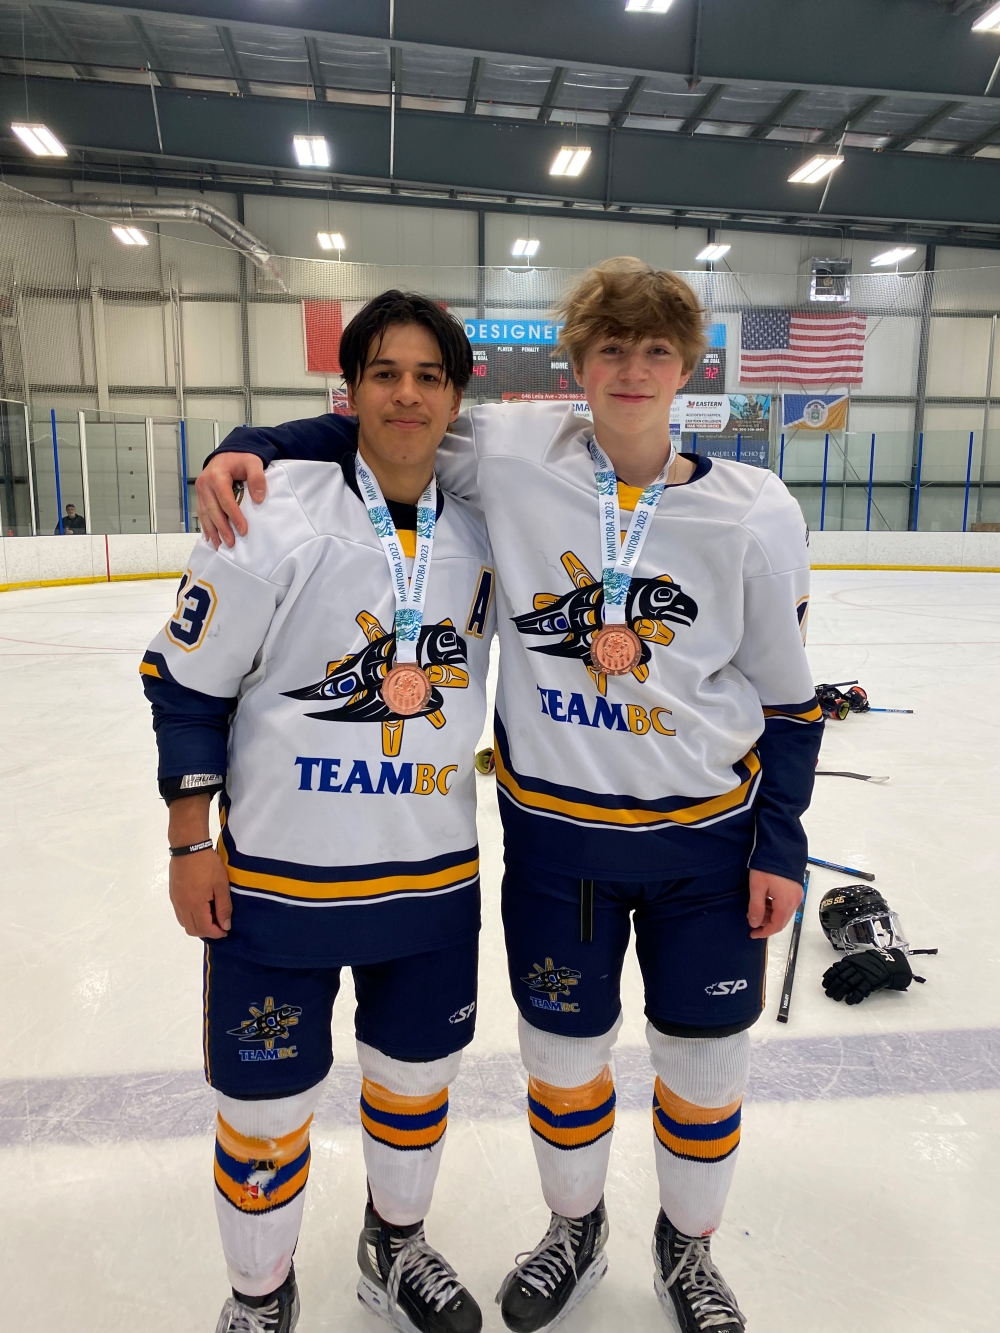 Two hockey players smile with bronze medals